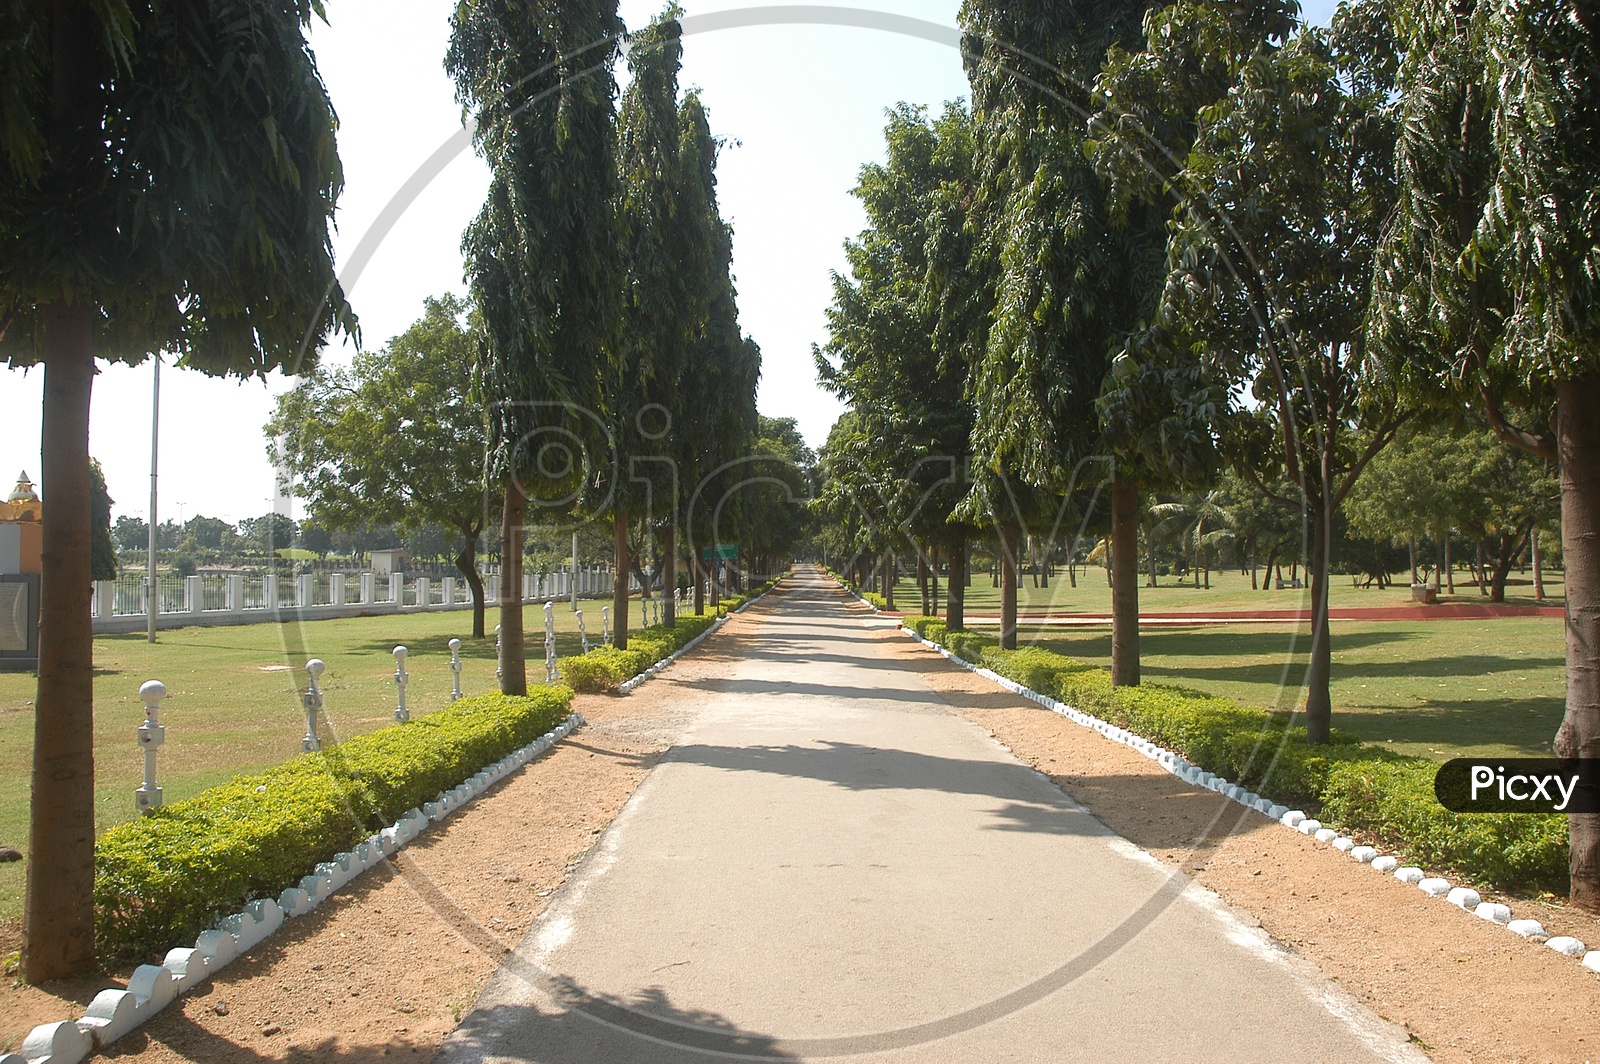 Pathway covered with trees